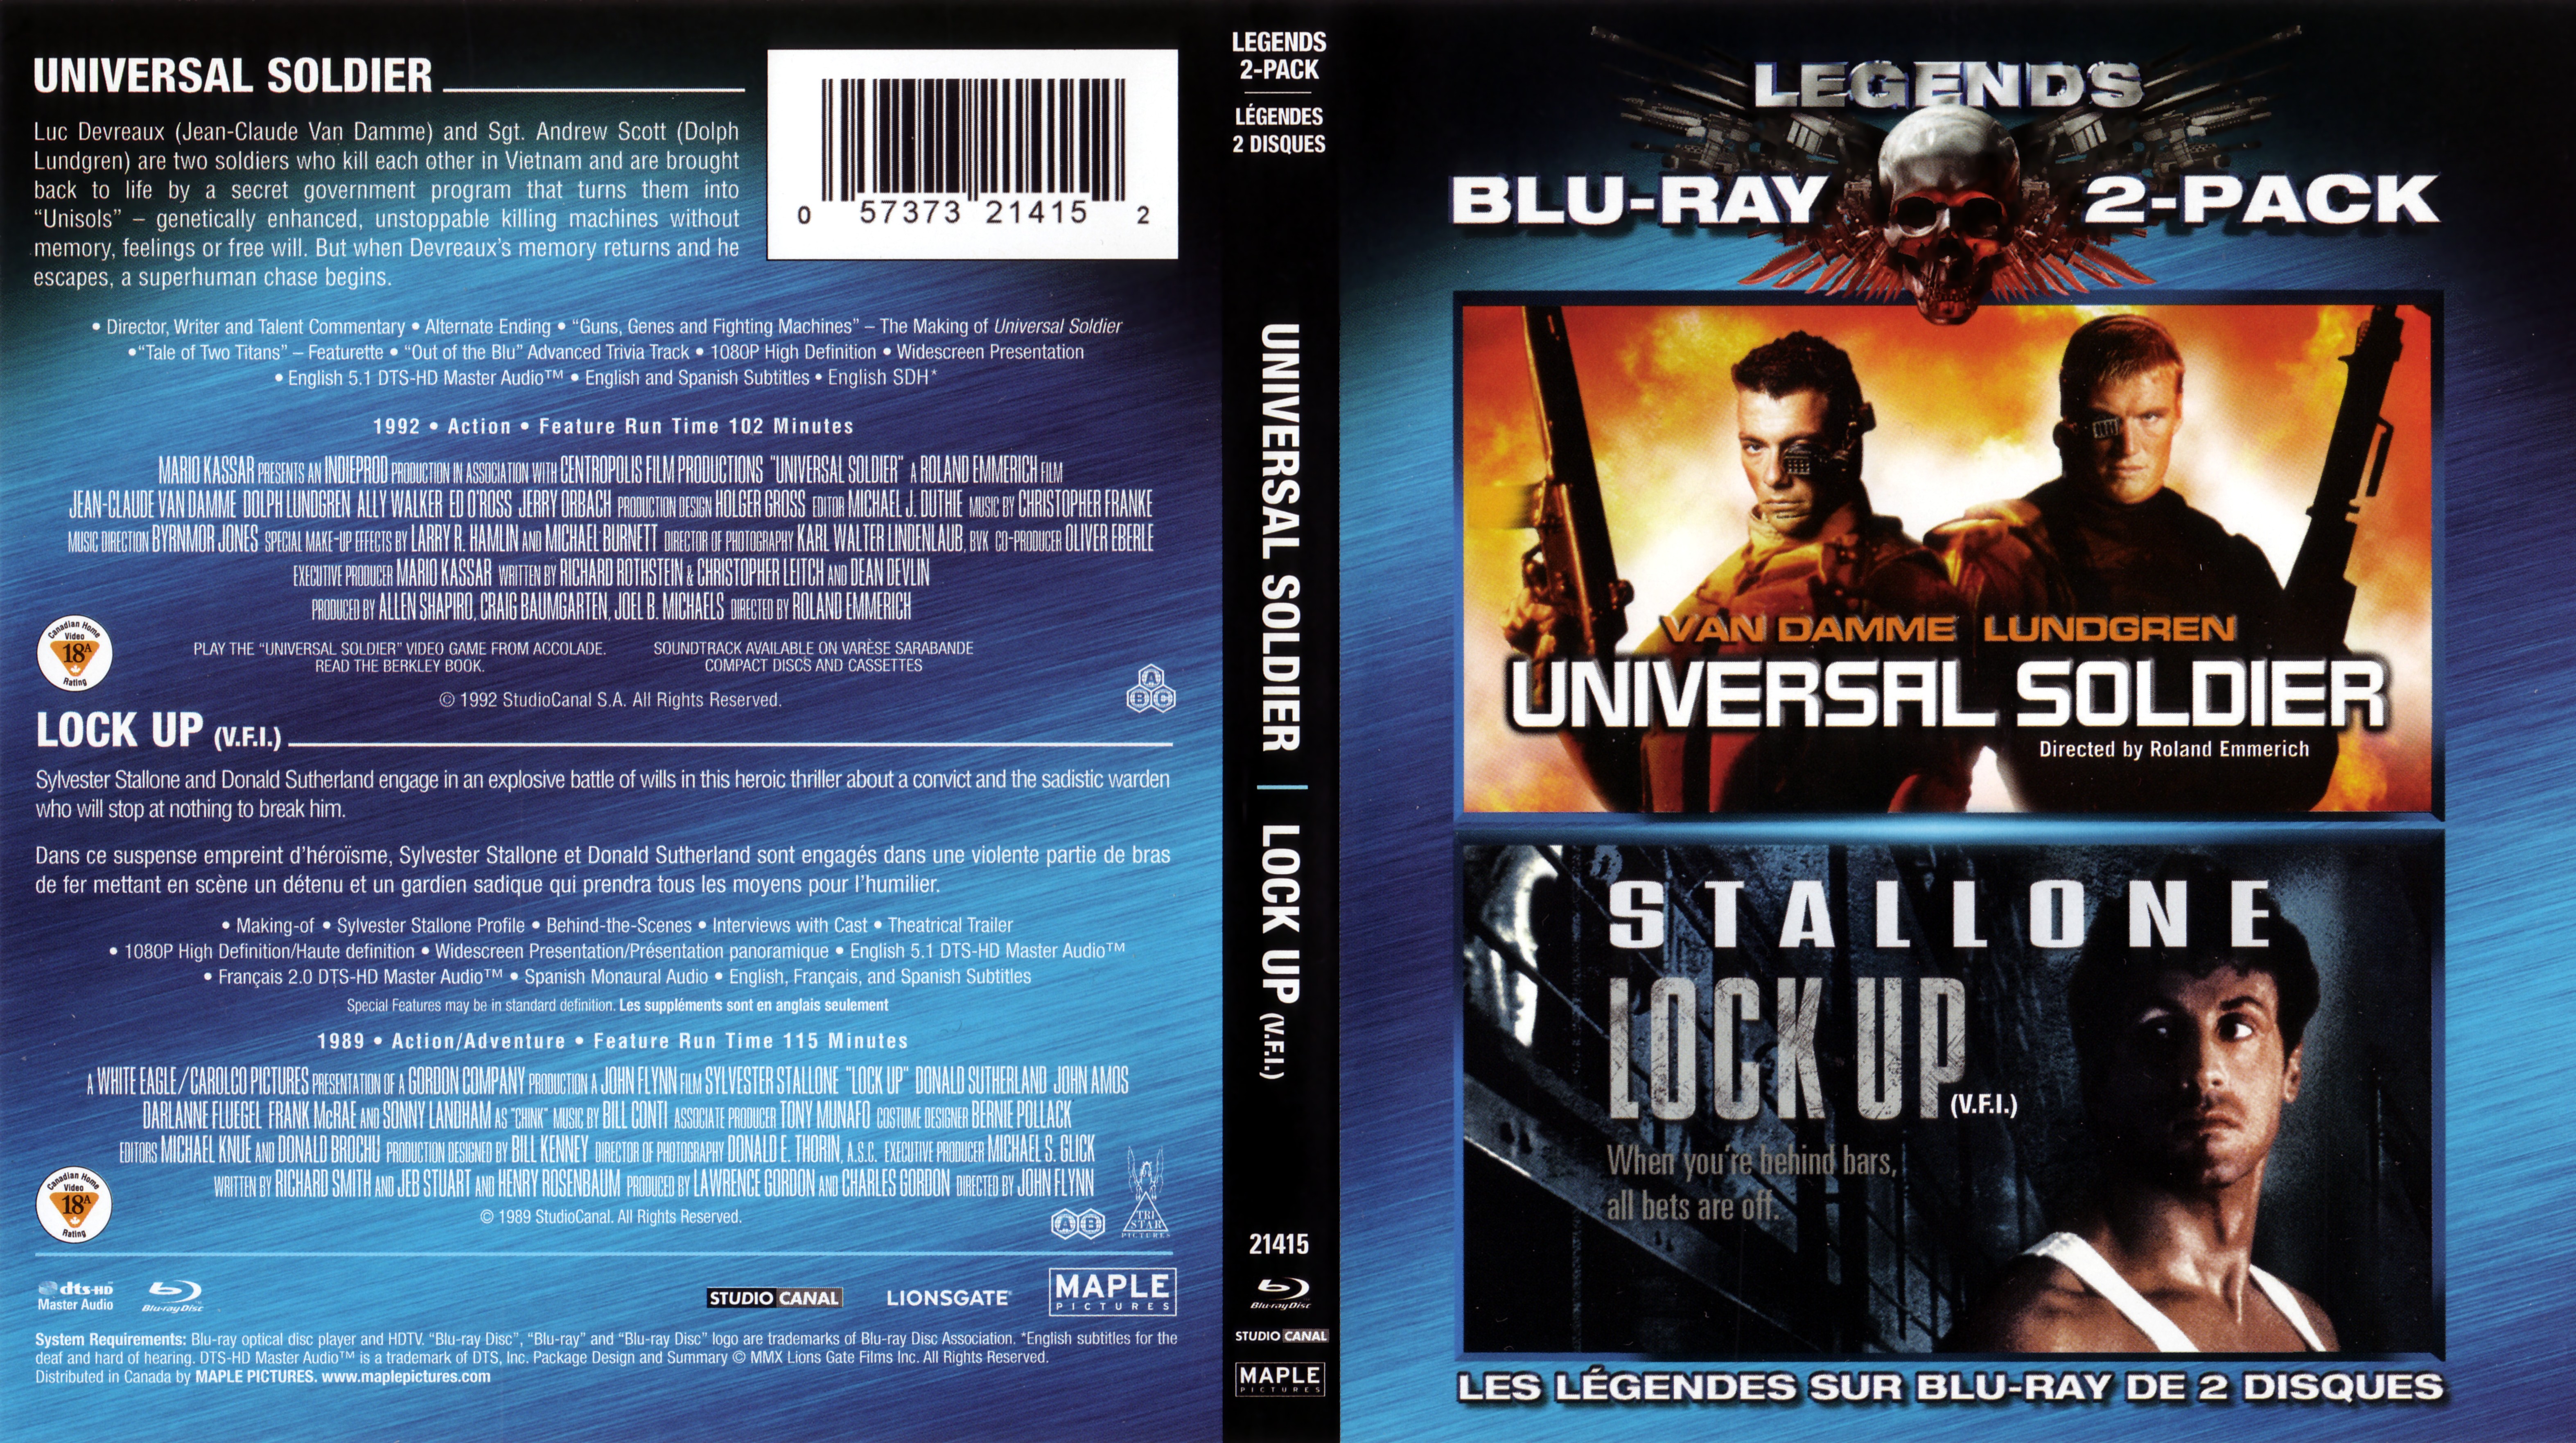 Jaquette DVD Universal Soldier + Lock Up (Canadienne) (BLU-RAY)